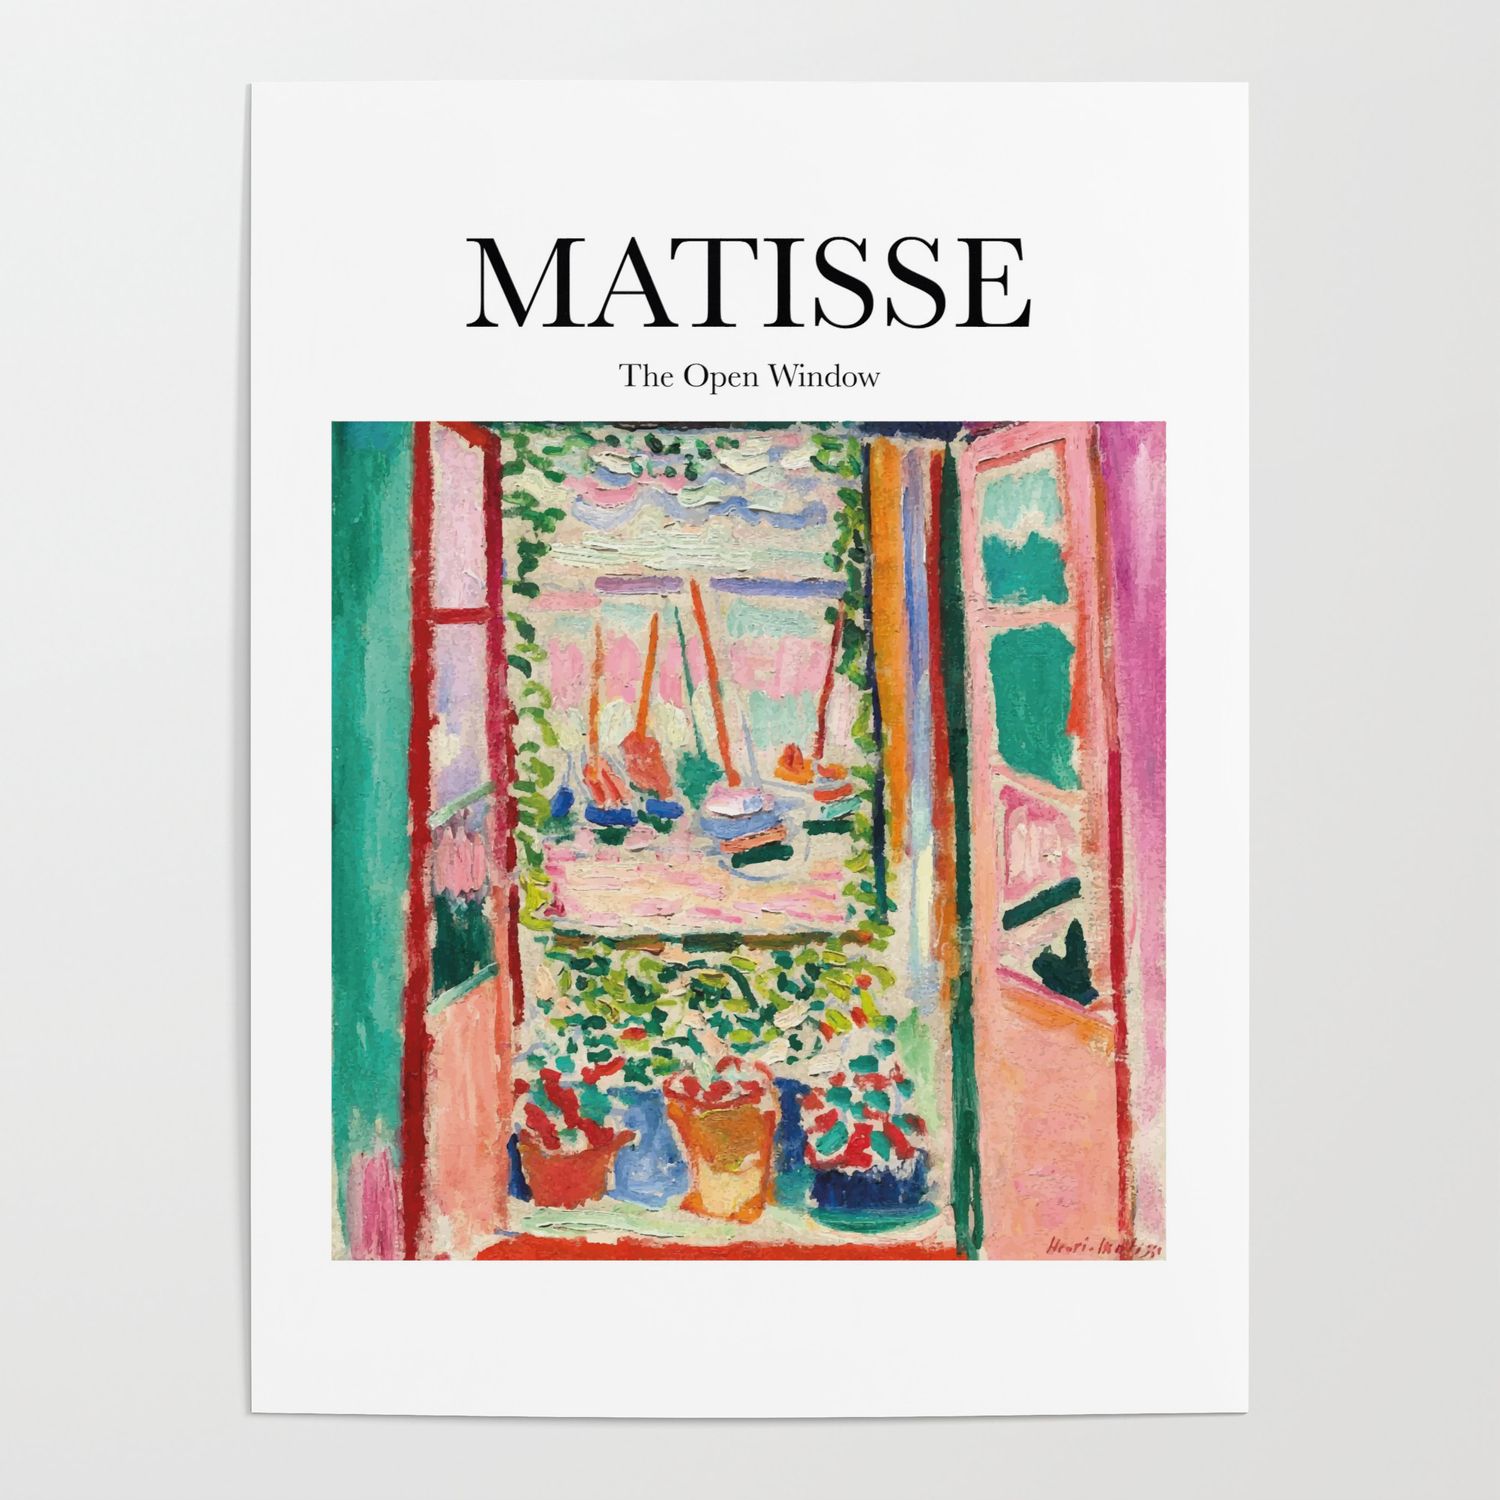 Matisse – The Open Window Posterartily | Society6 Intended For The Open Window Wall Art (View 9 of 15)